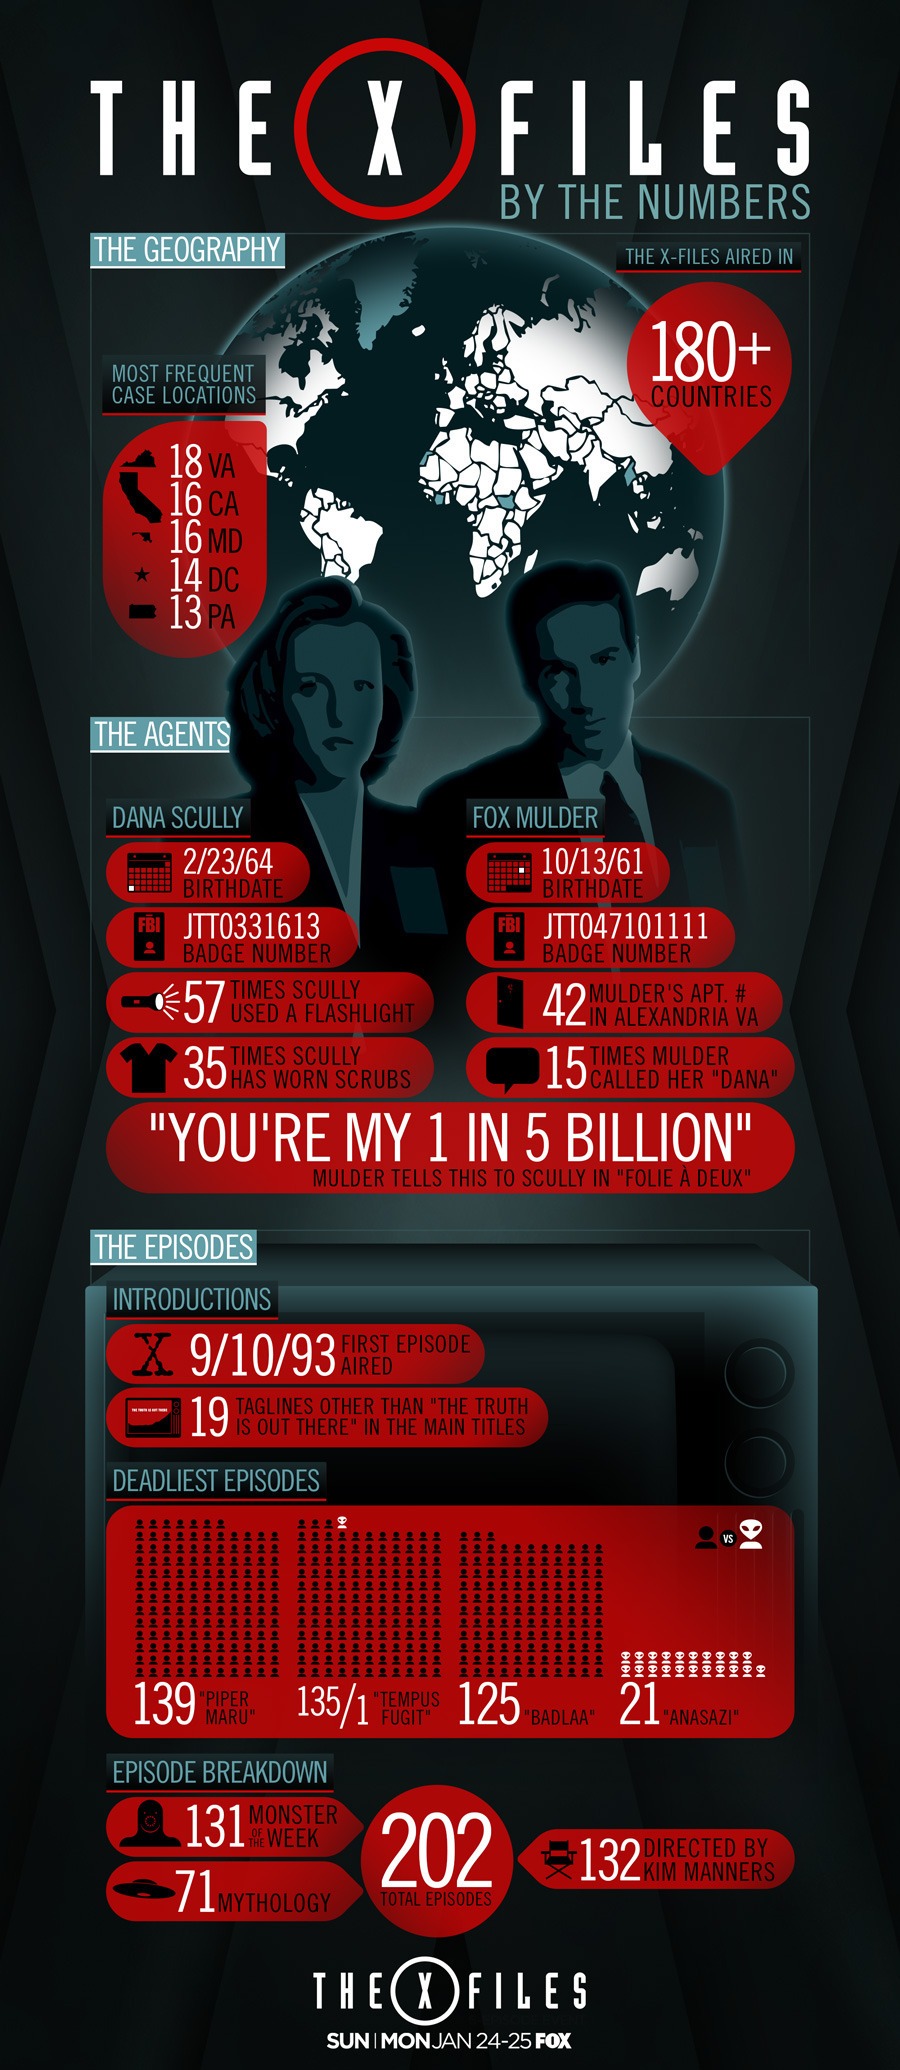 x-files-by-numbers-infographic-v5 (3)